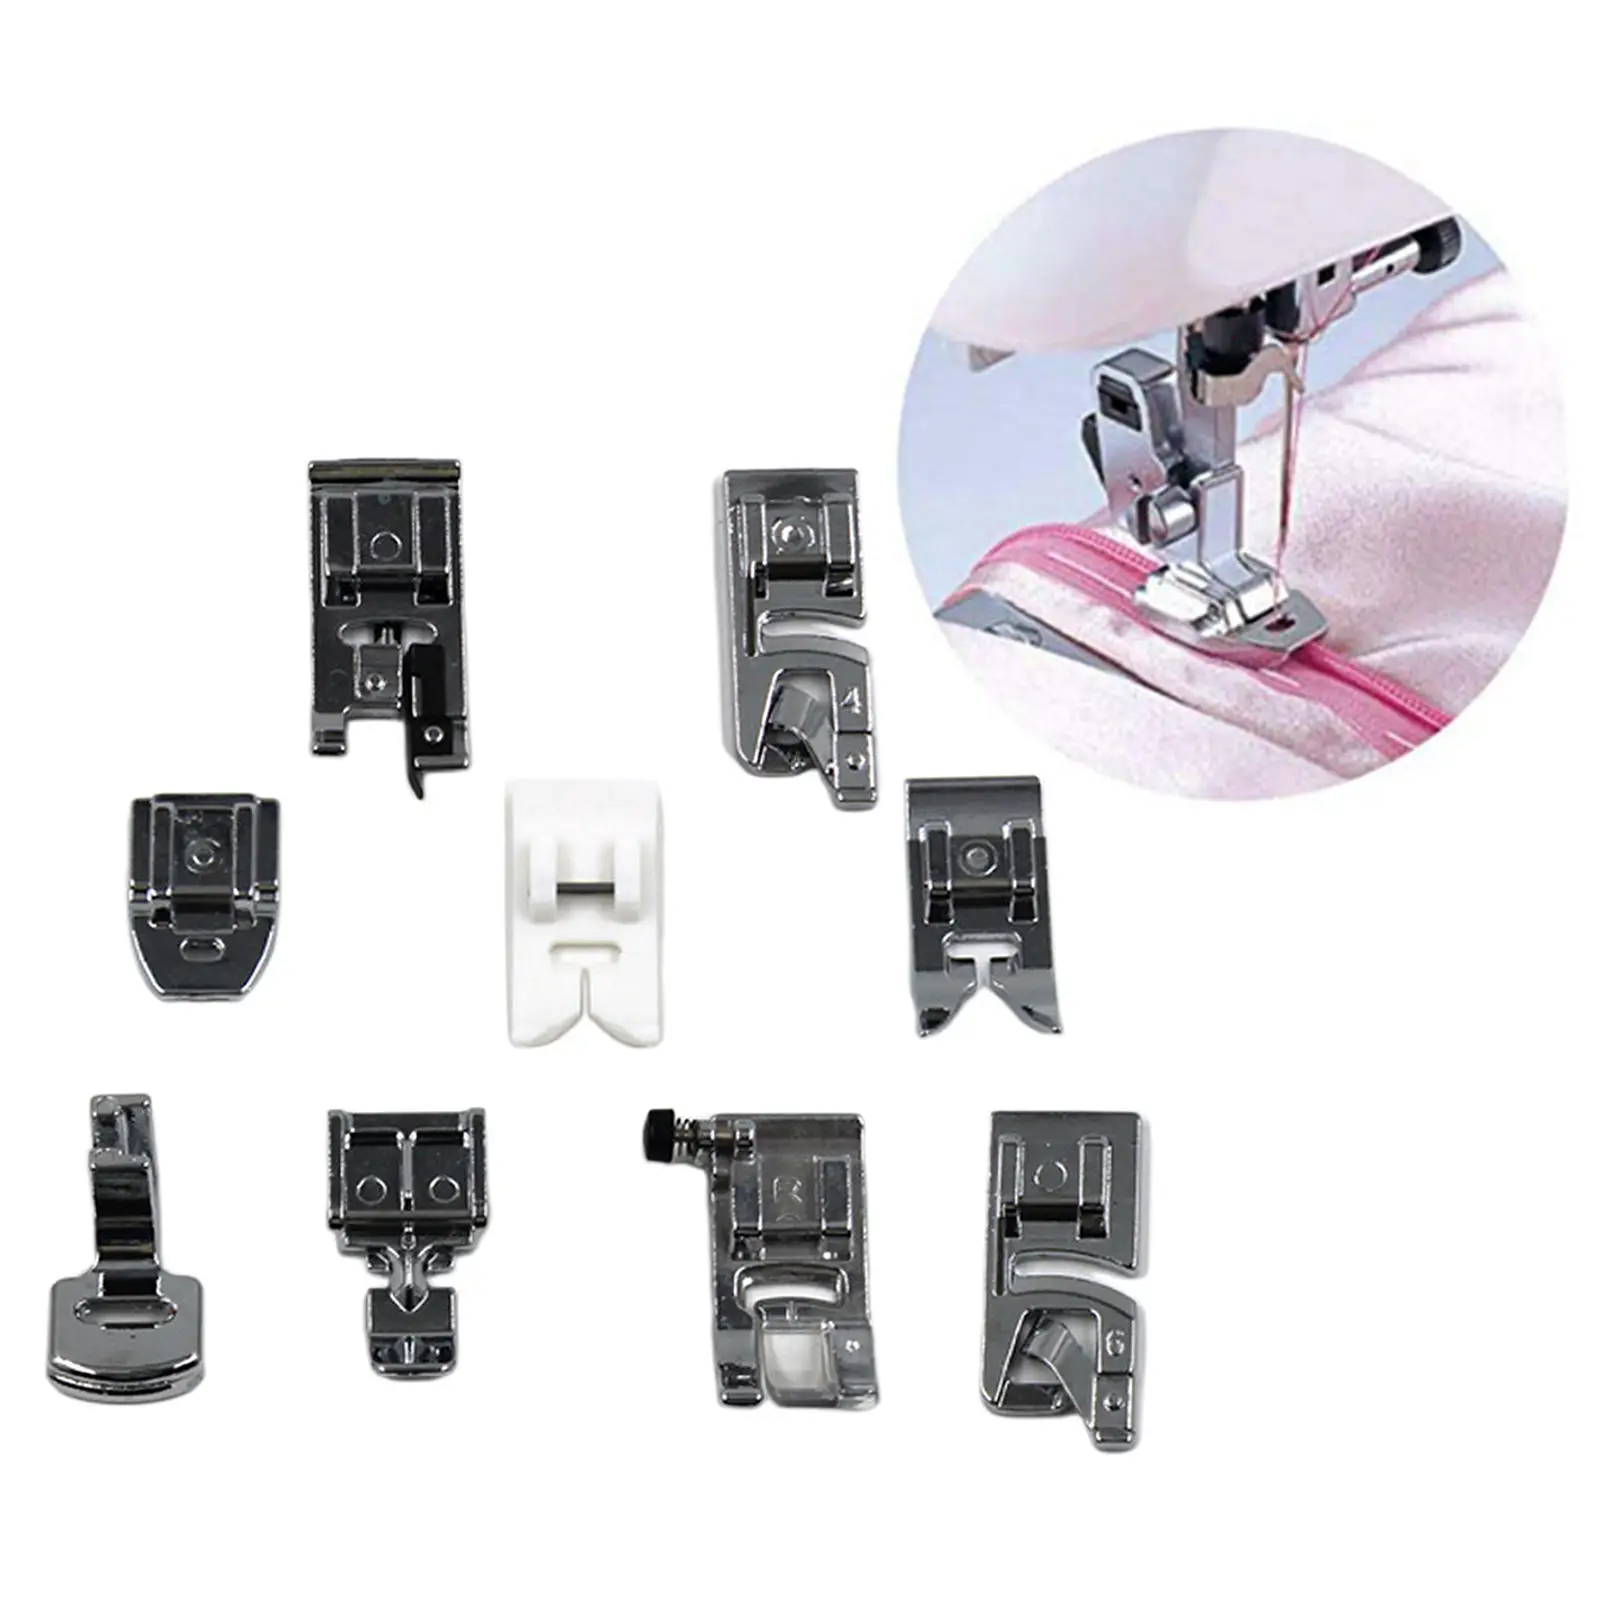 9Pcs Universal Adjustable Zipper Presser Foot Suitable for Most of Domestic Sewing Machines Clothes Draft Supplies